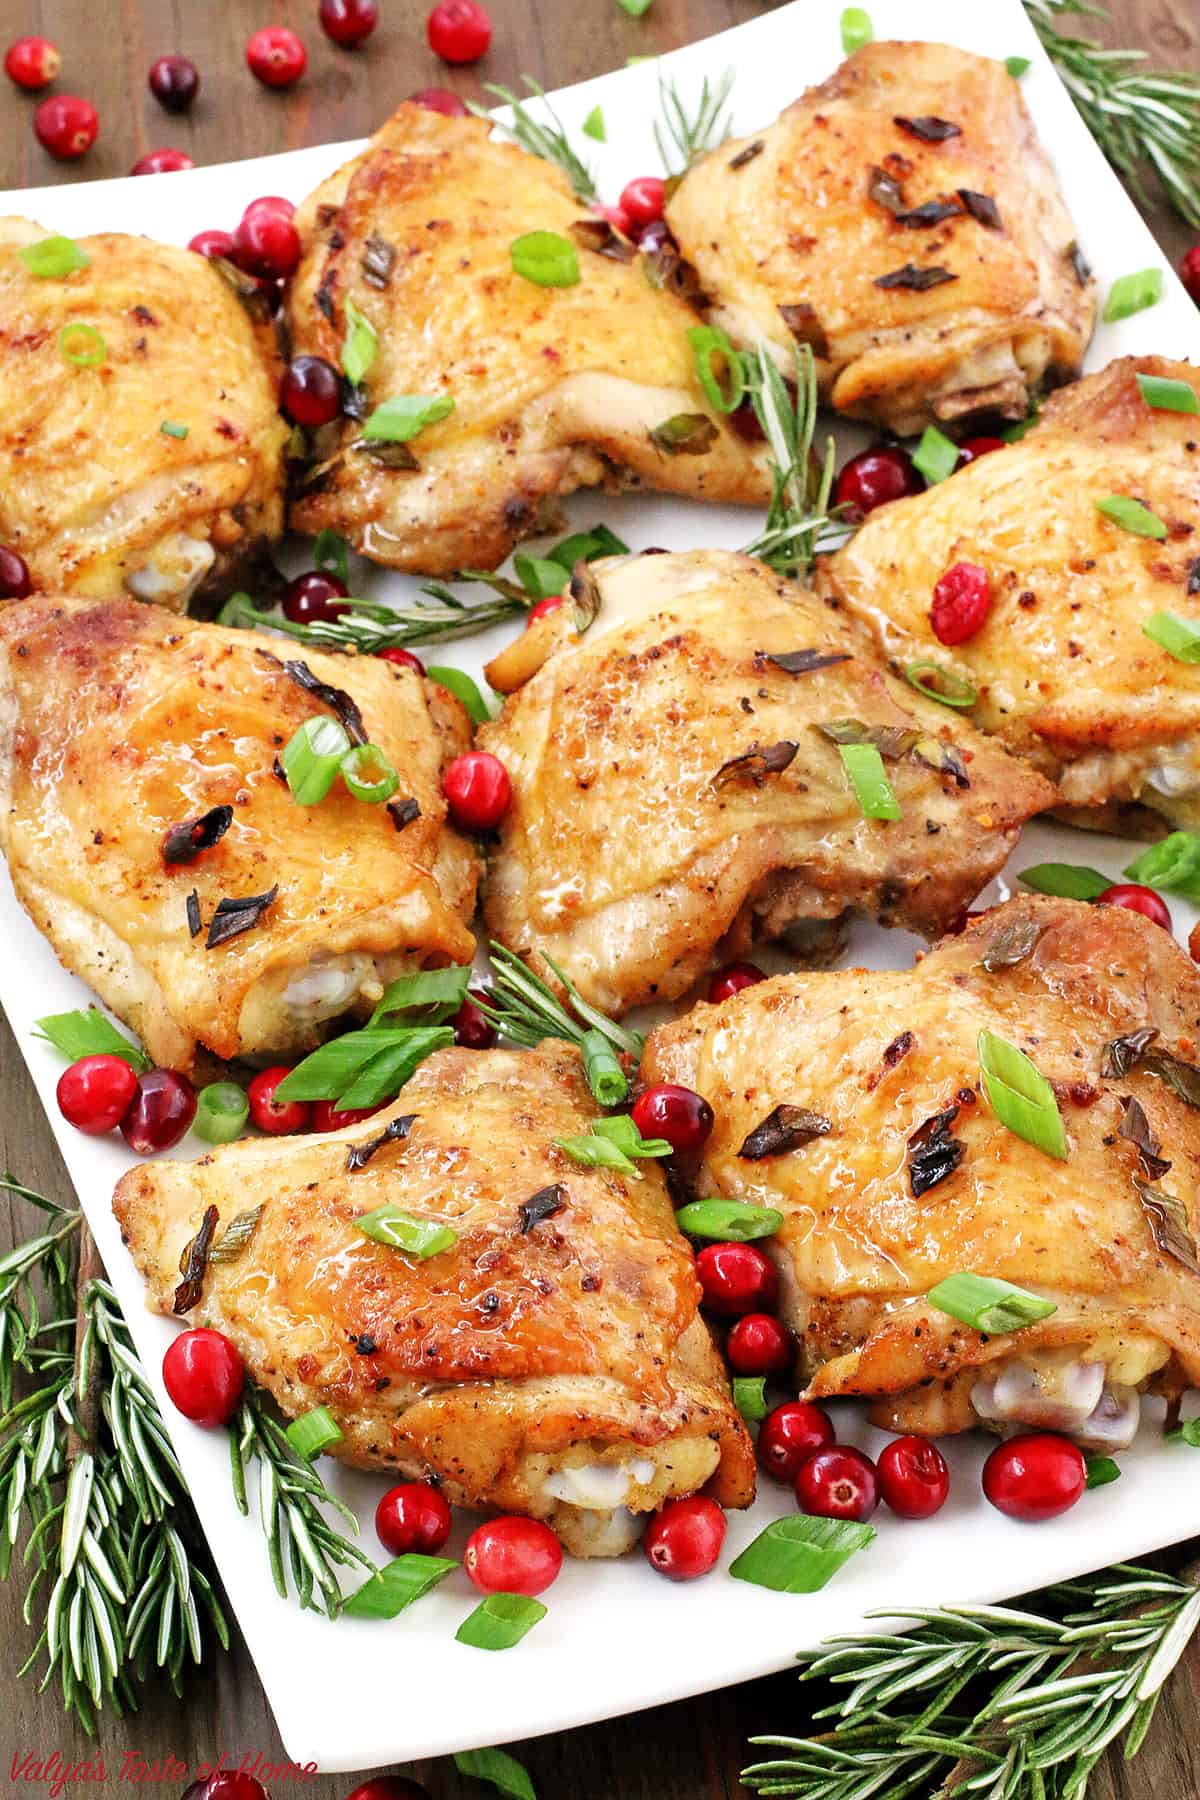 This recipe is versatile enough that you can still use it for whole chicken after removing the giblets, or maybe even some drumsticks!